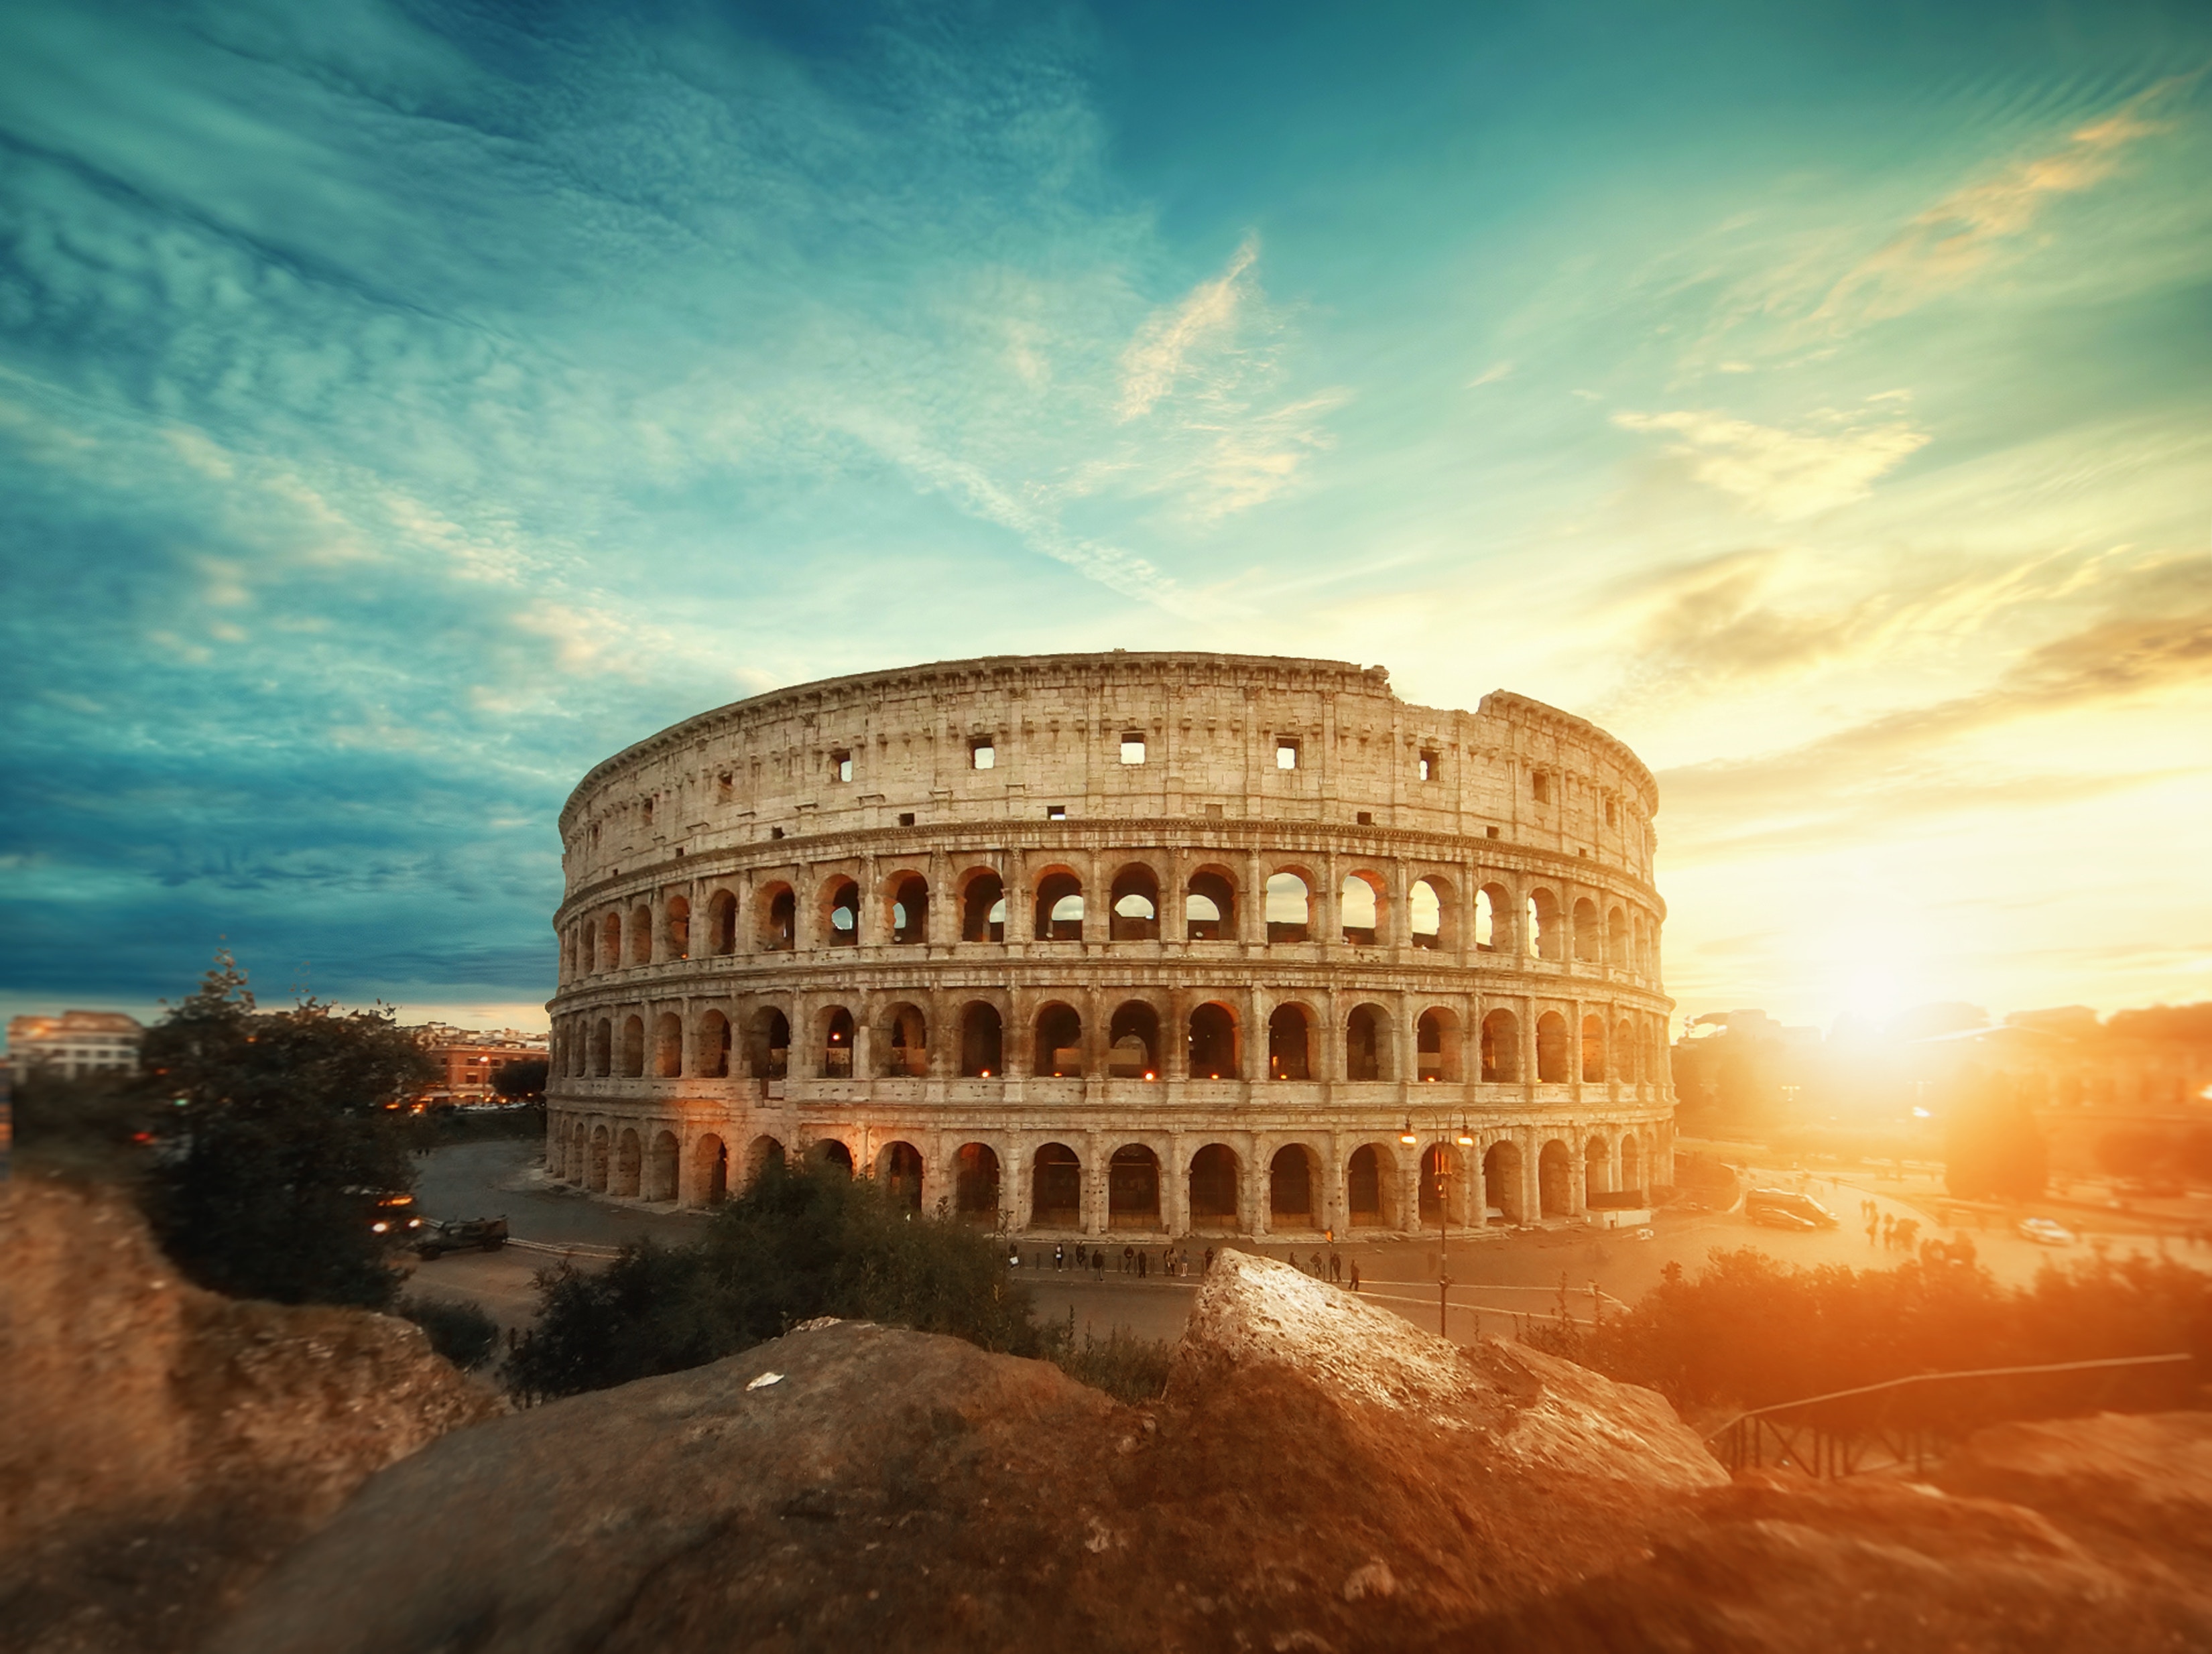 an image of colosseum, rome, italy